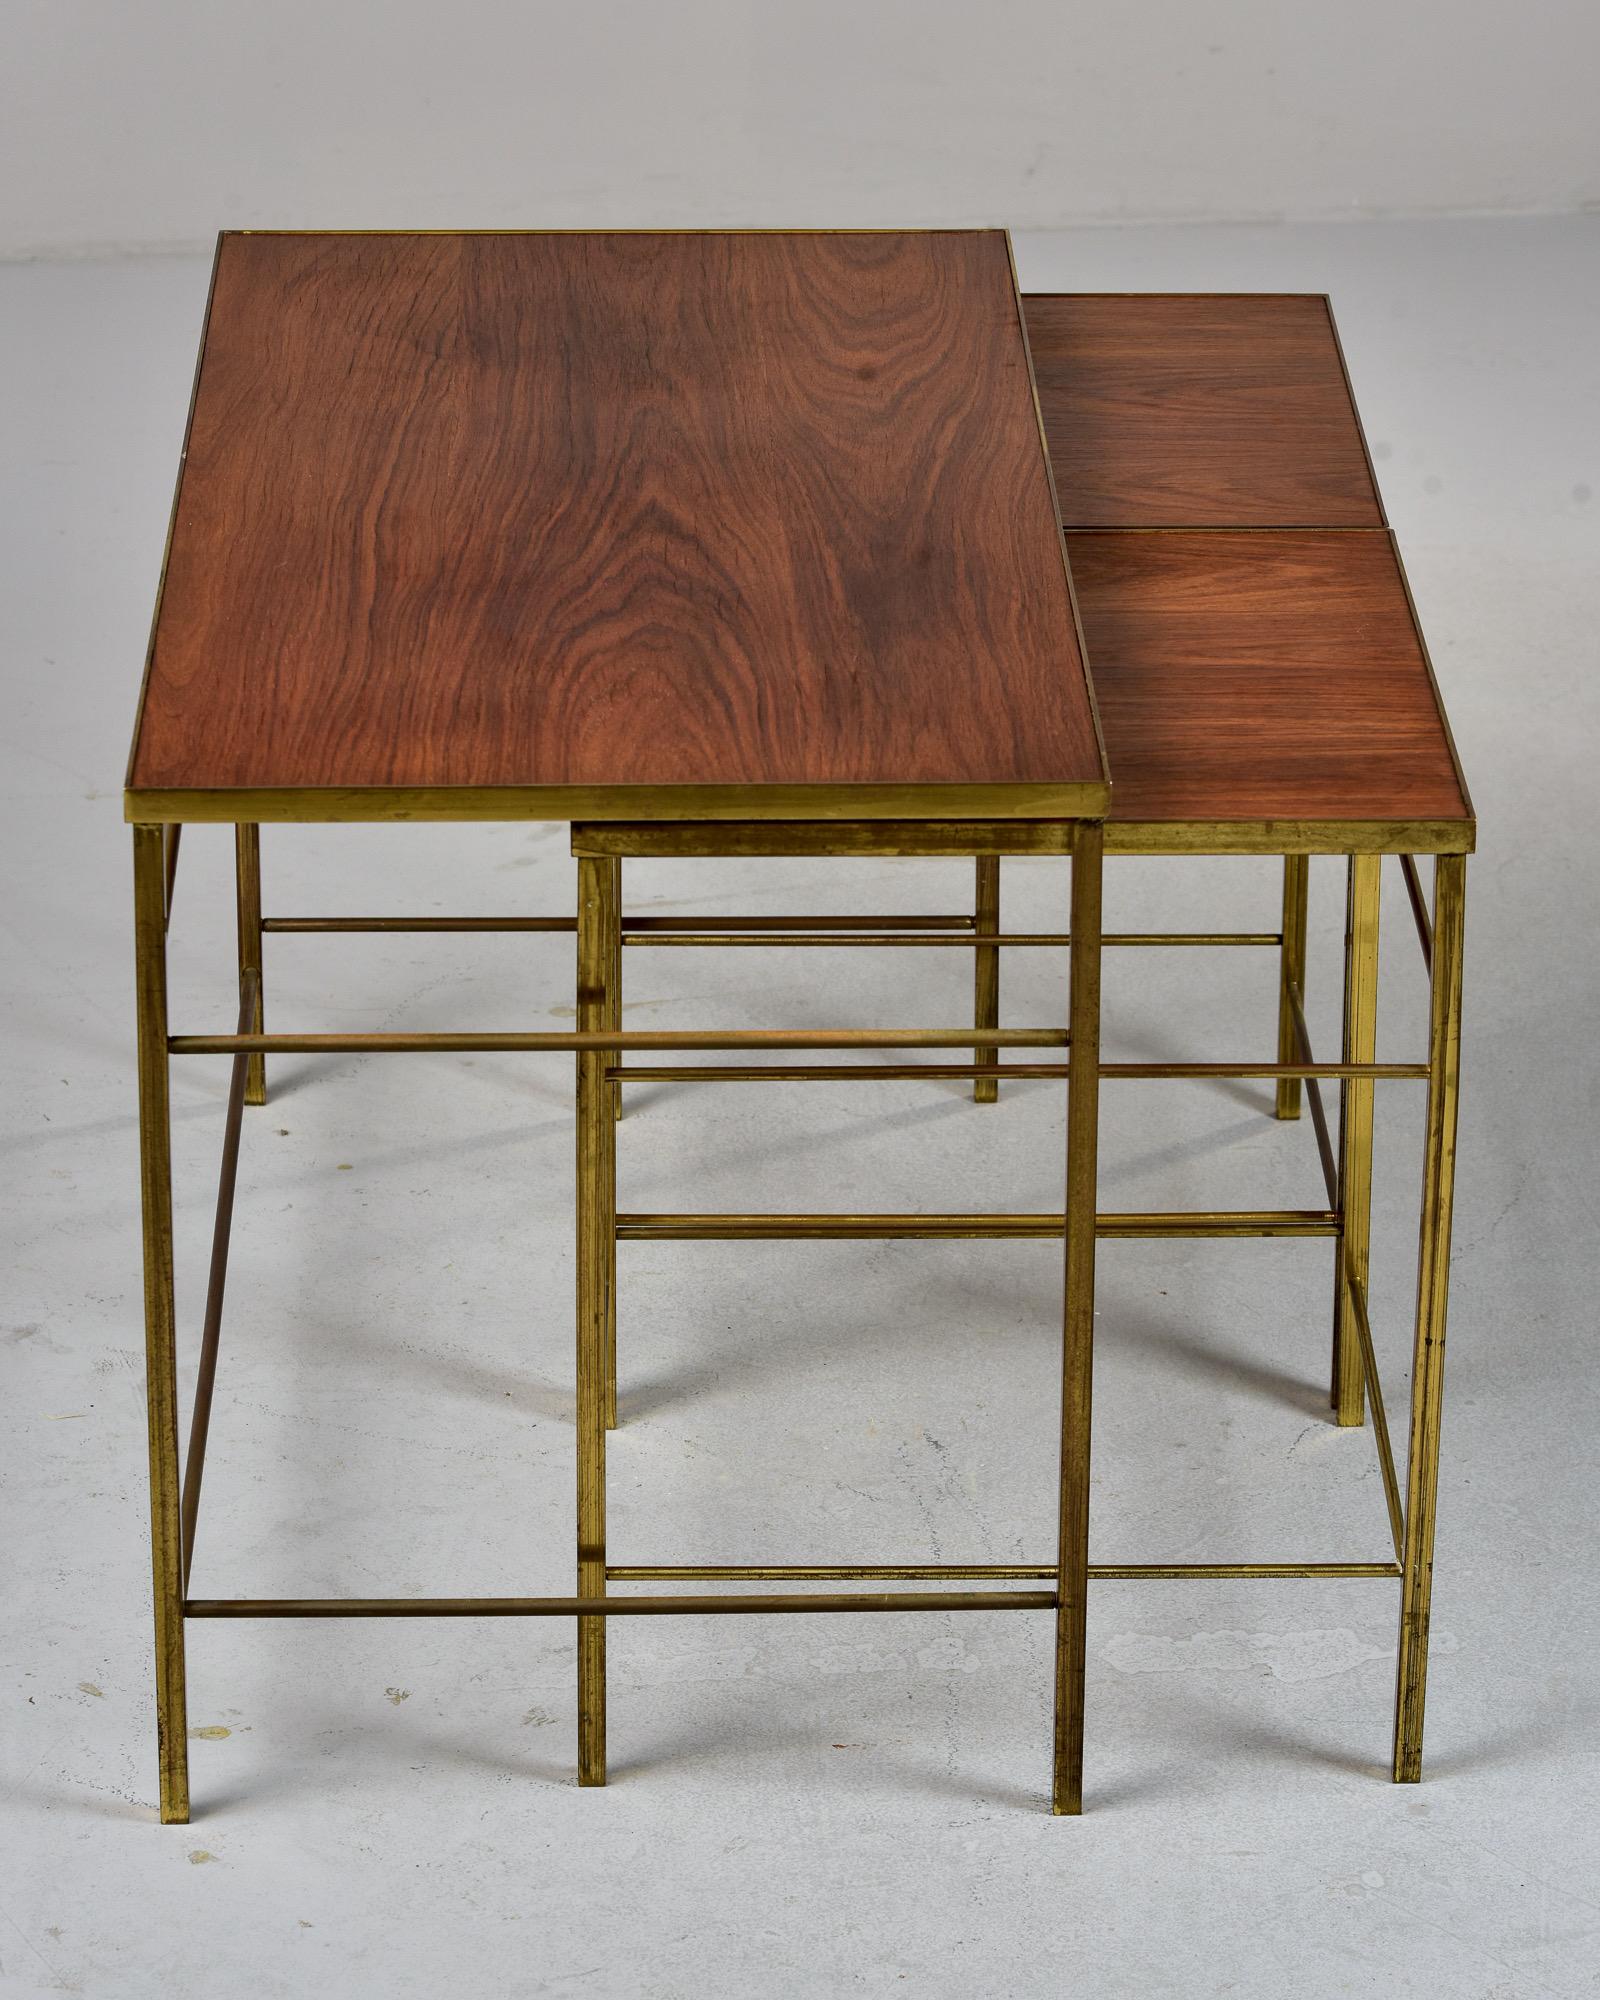 20th Century English Mid Century Brass and Wood Trio of Stacking Tables For Sale